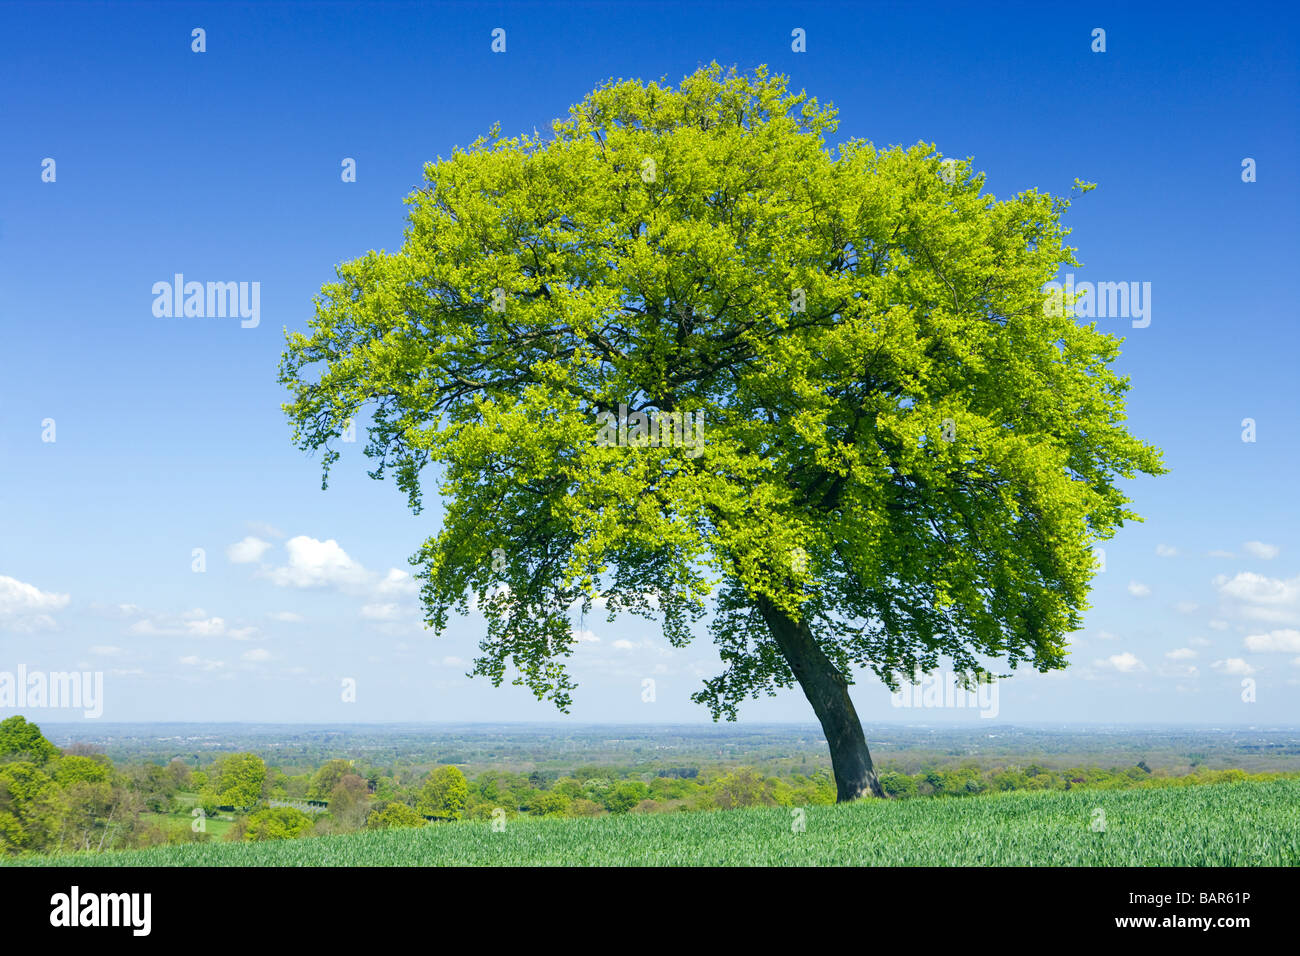 Lone beech tree in farm field. North Downs au Clandon, Surrey, UK. Banque D'Images